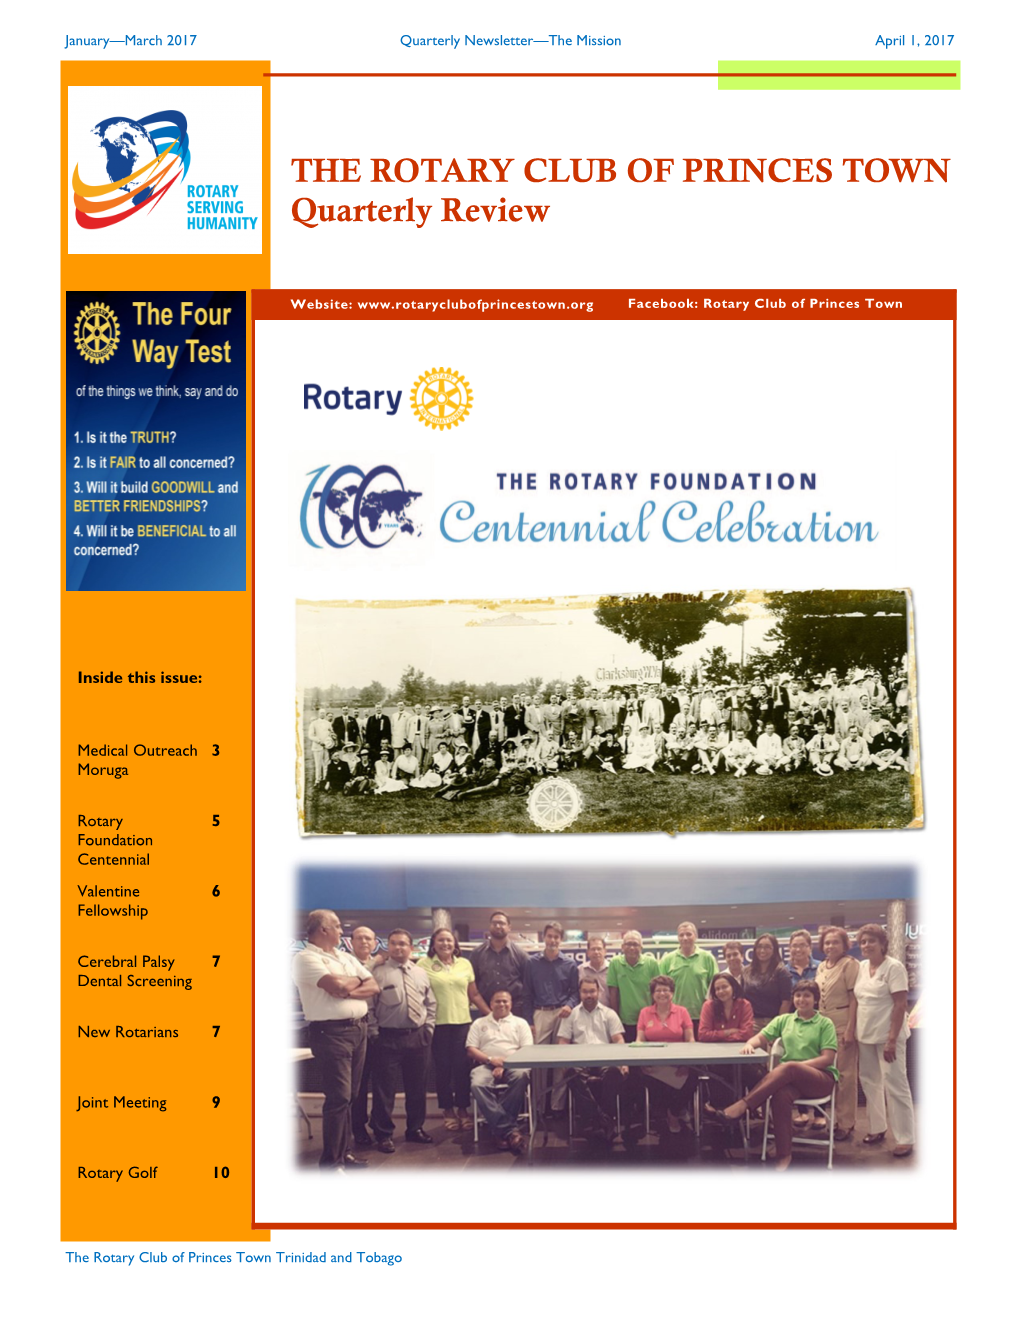 THE ROTARY CLUB of PRINCES TOWN Quarterly Review